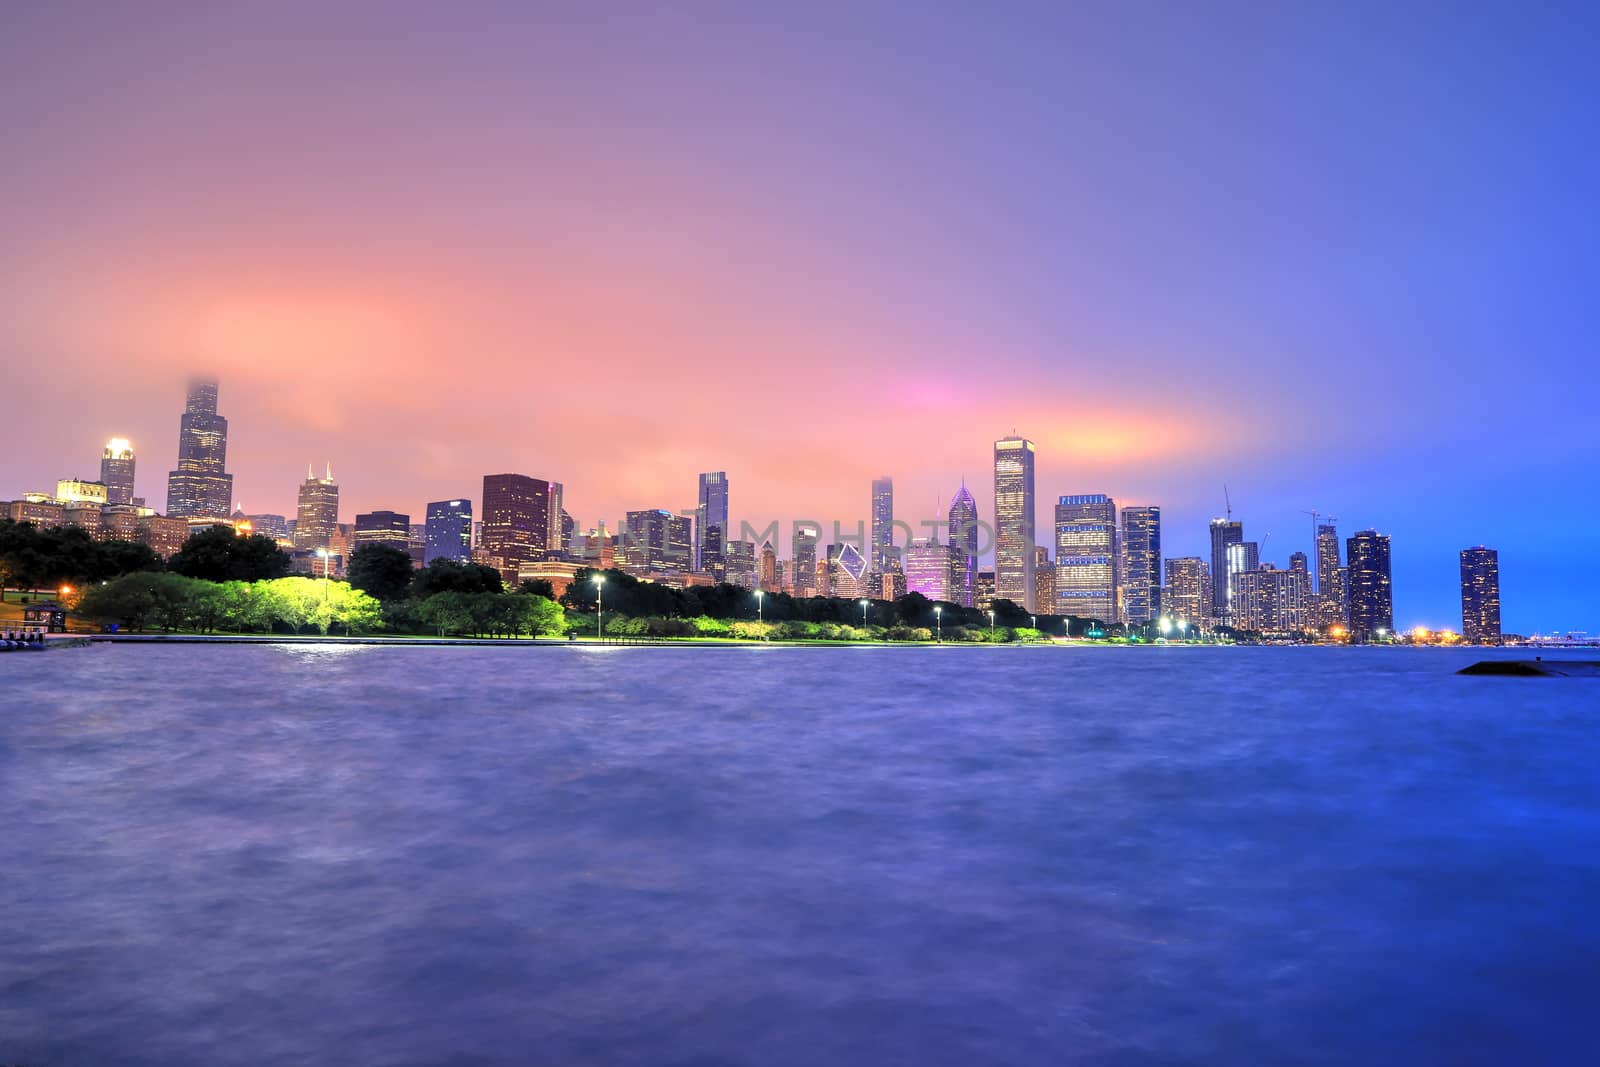 The Chicago skyline at night after a storm across Lake Michigan.